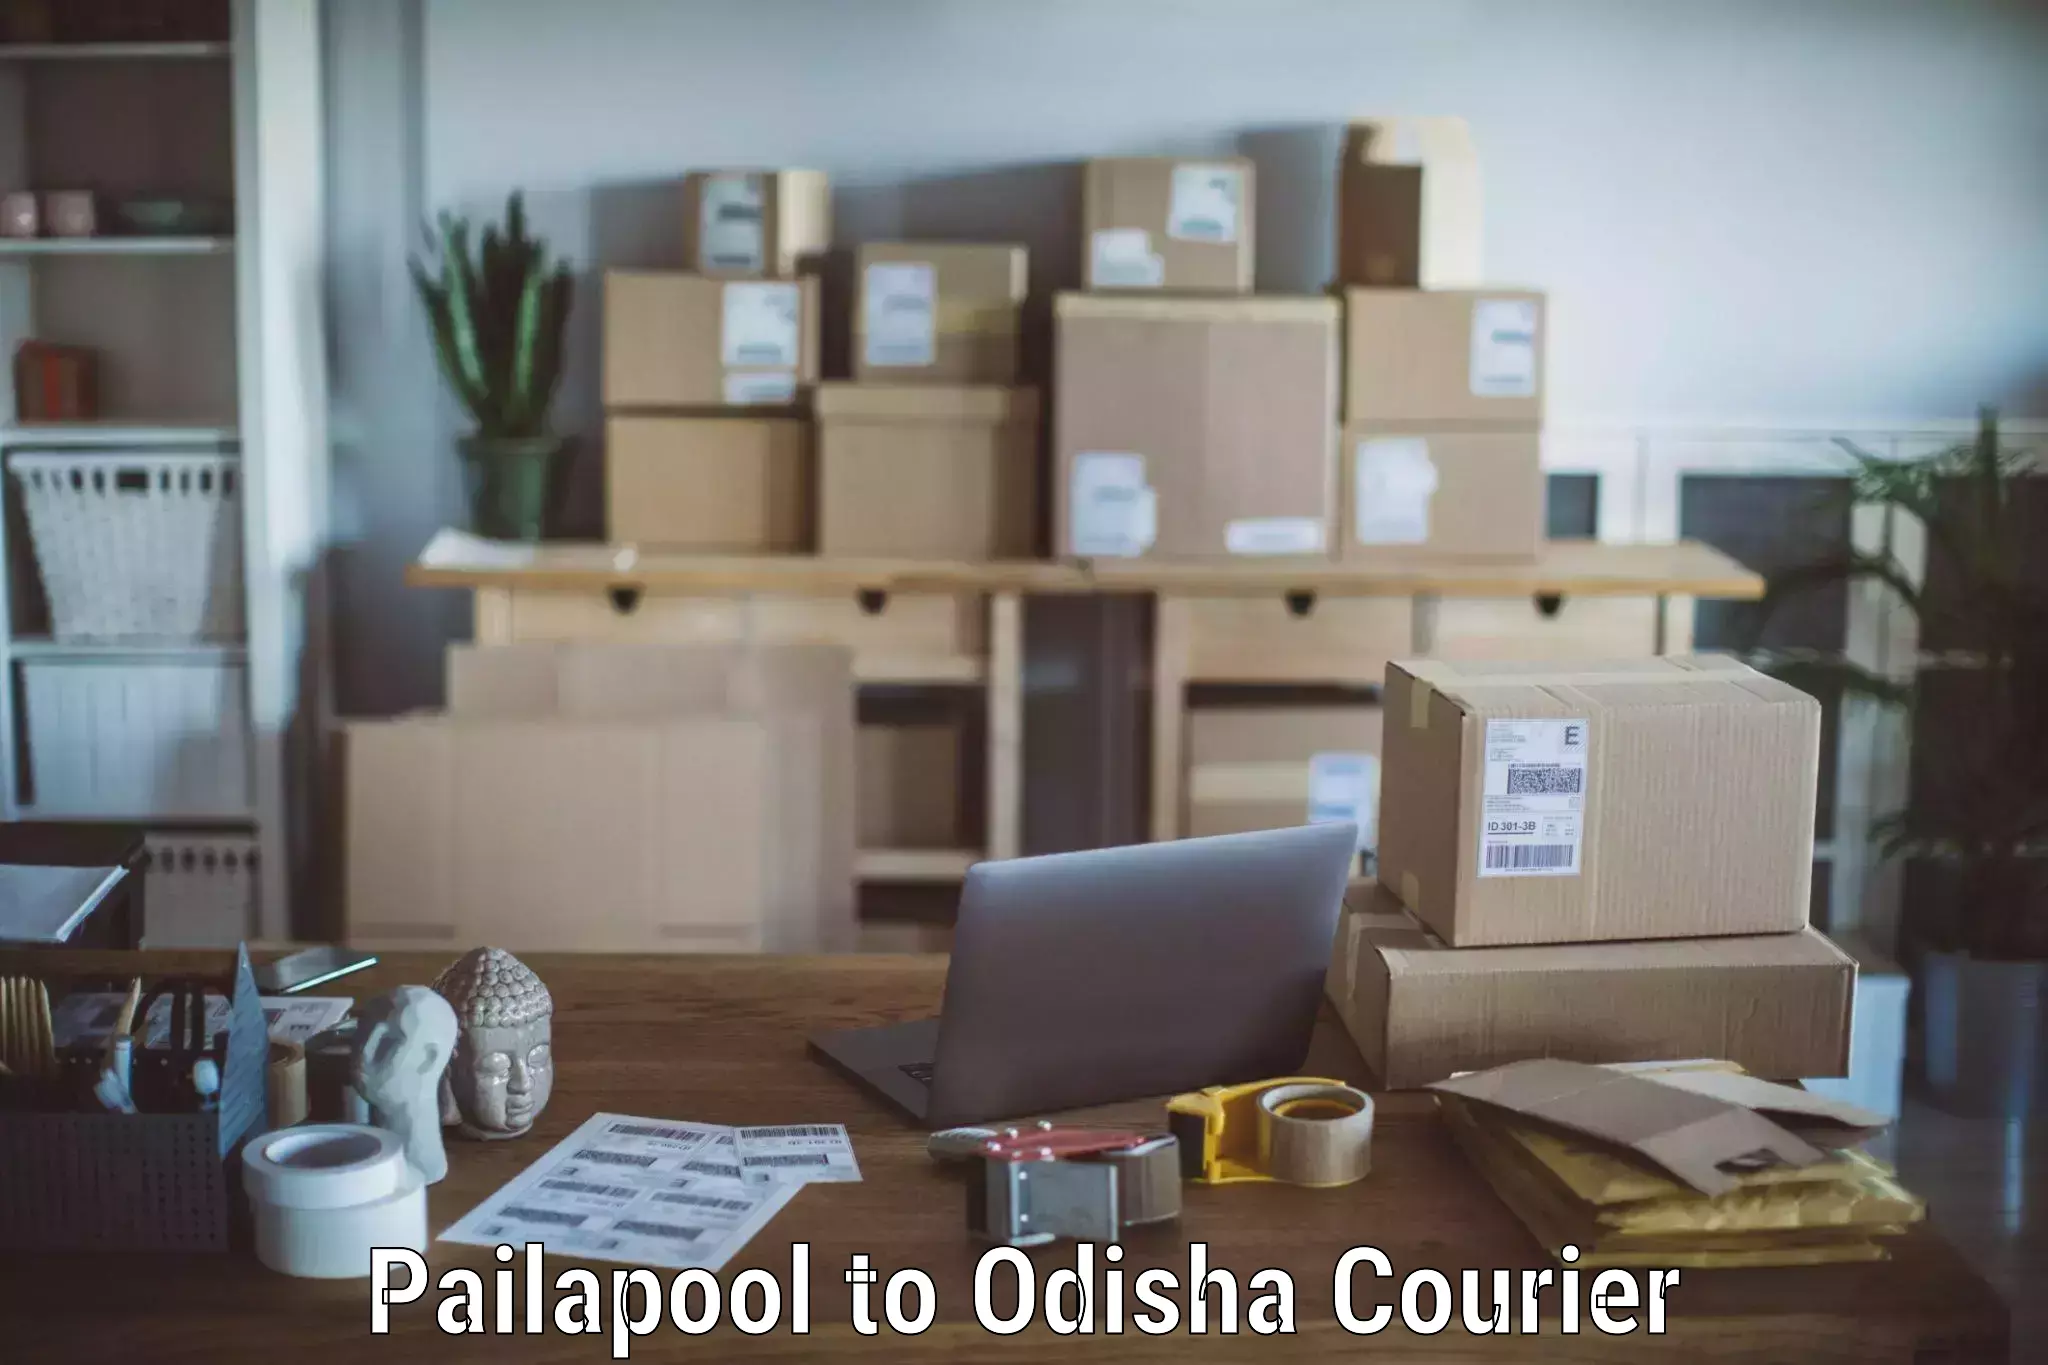 Moving and storage services Pailapool to Binka